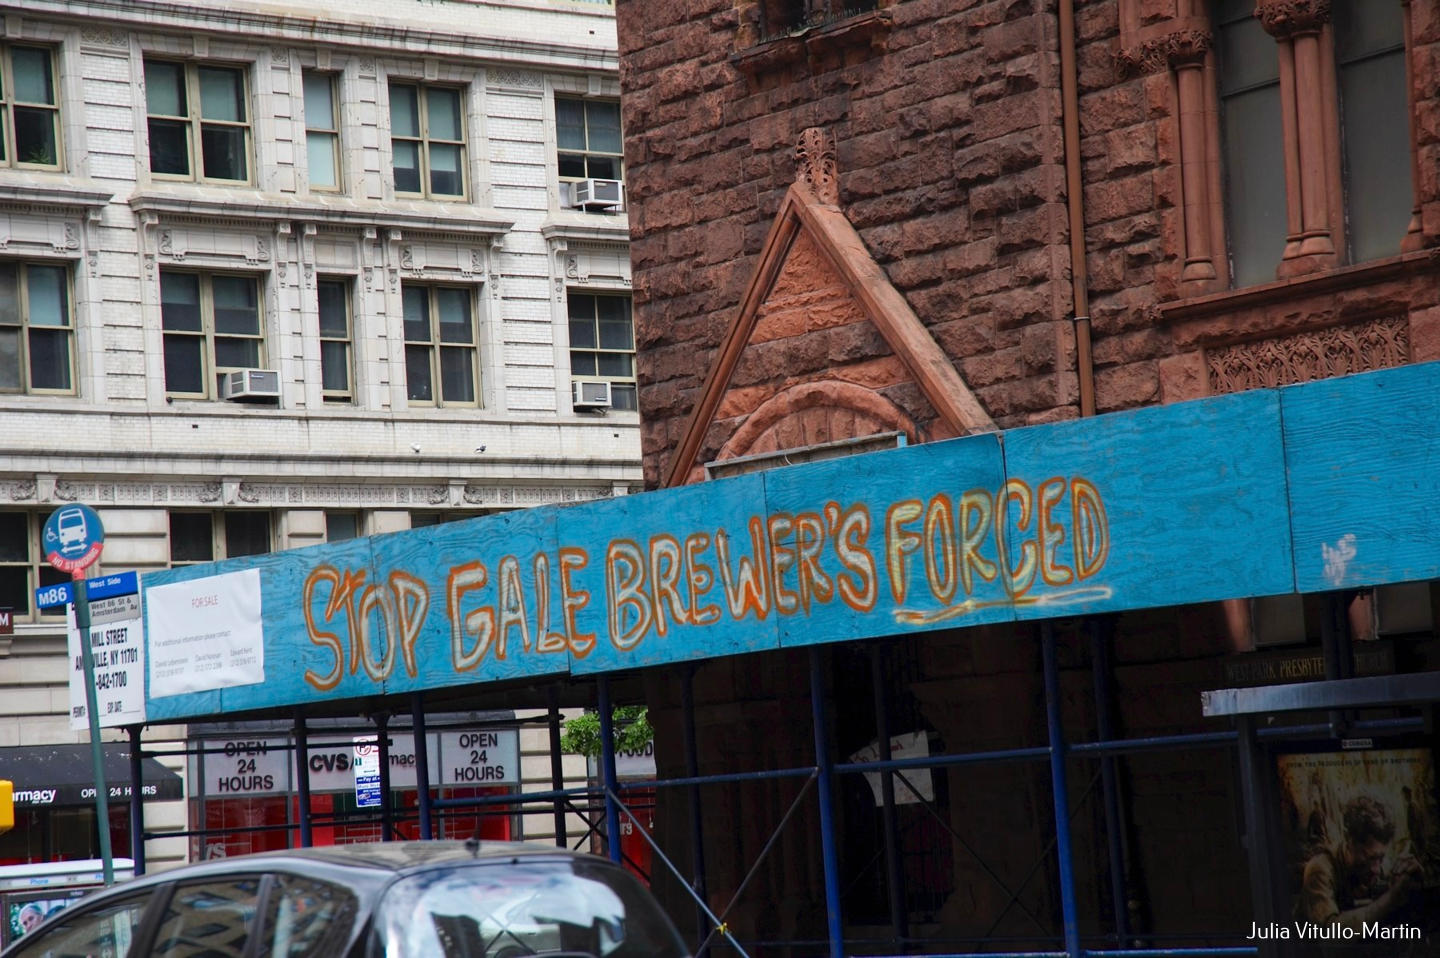 Scaffolding with text written, "Stop Gale Brewer's Forced."